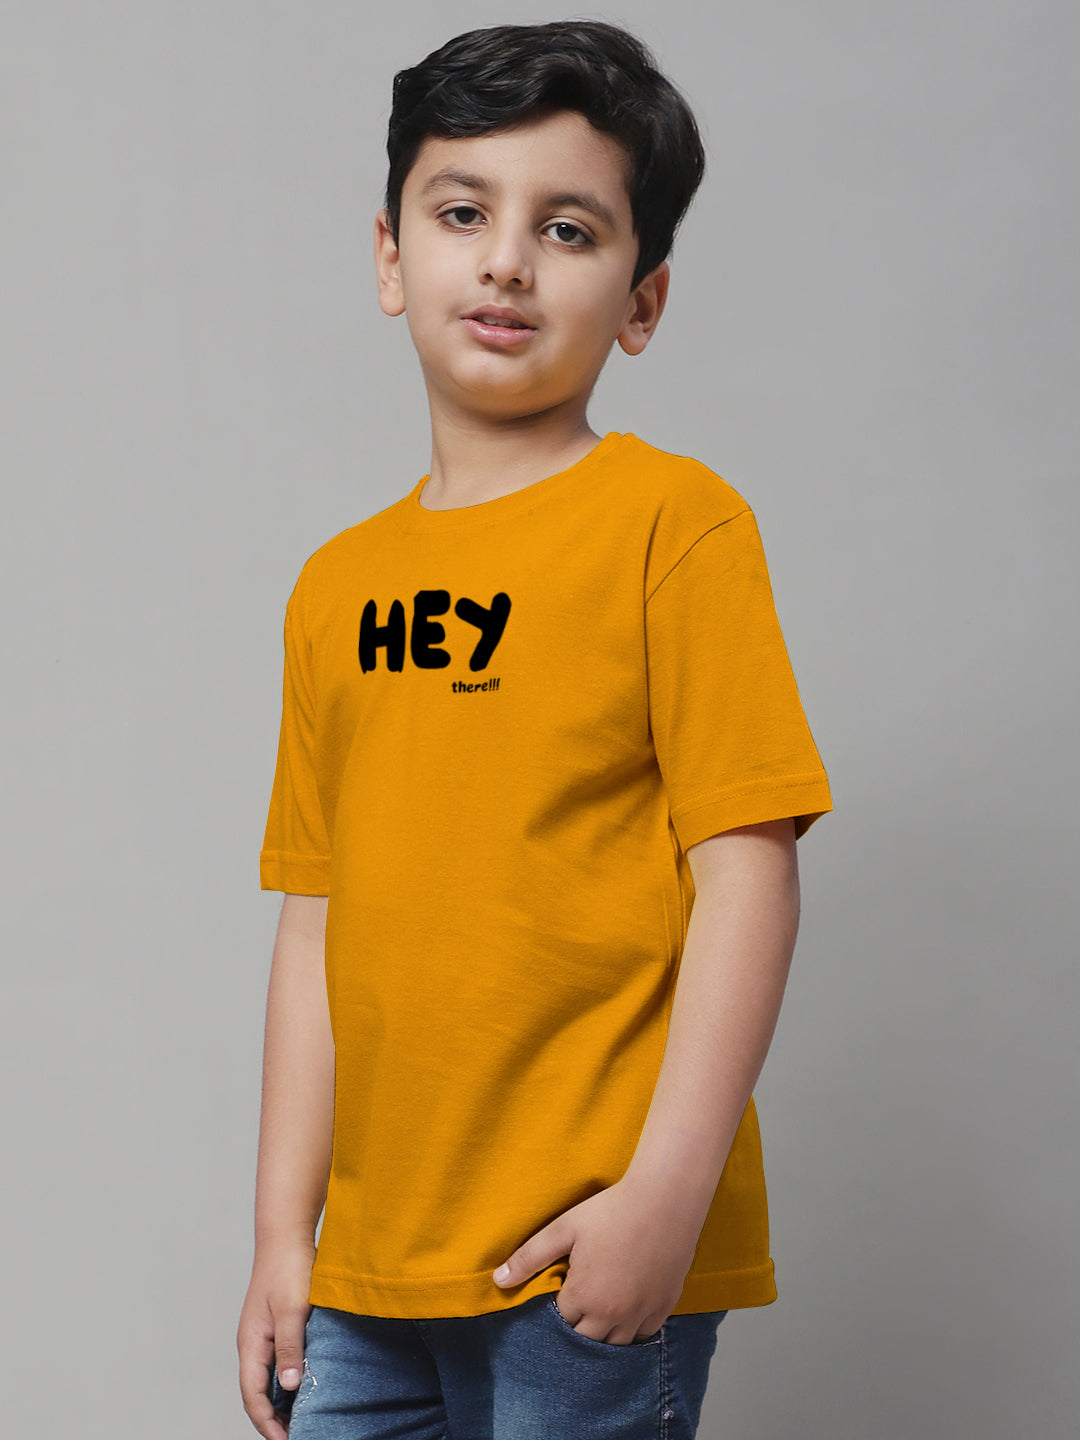 Boys Hey Casual Printed Cotton T-Shirt - Friskers